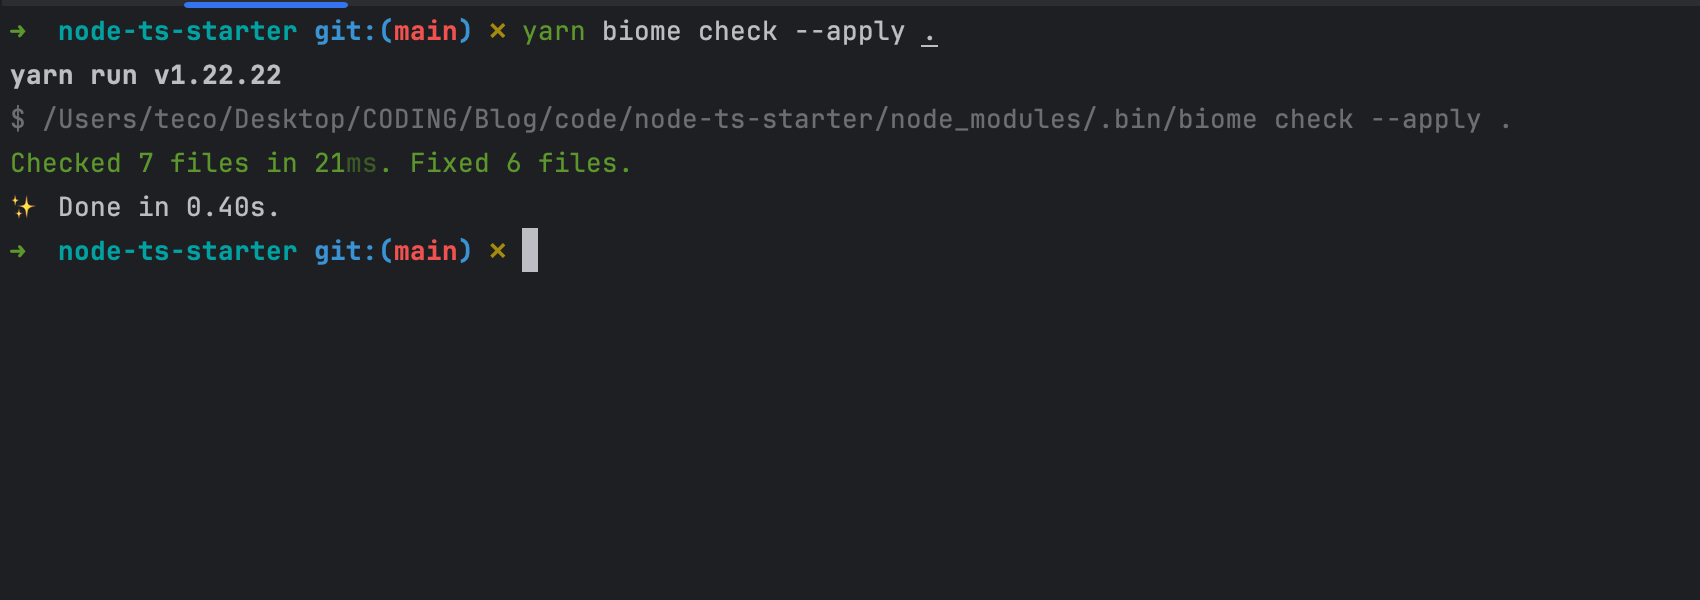 Lint and format the project's code with Biome.